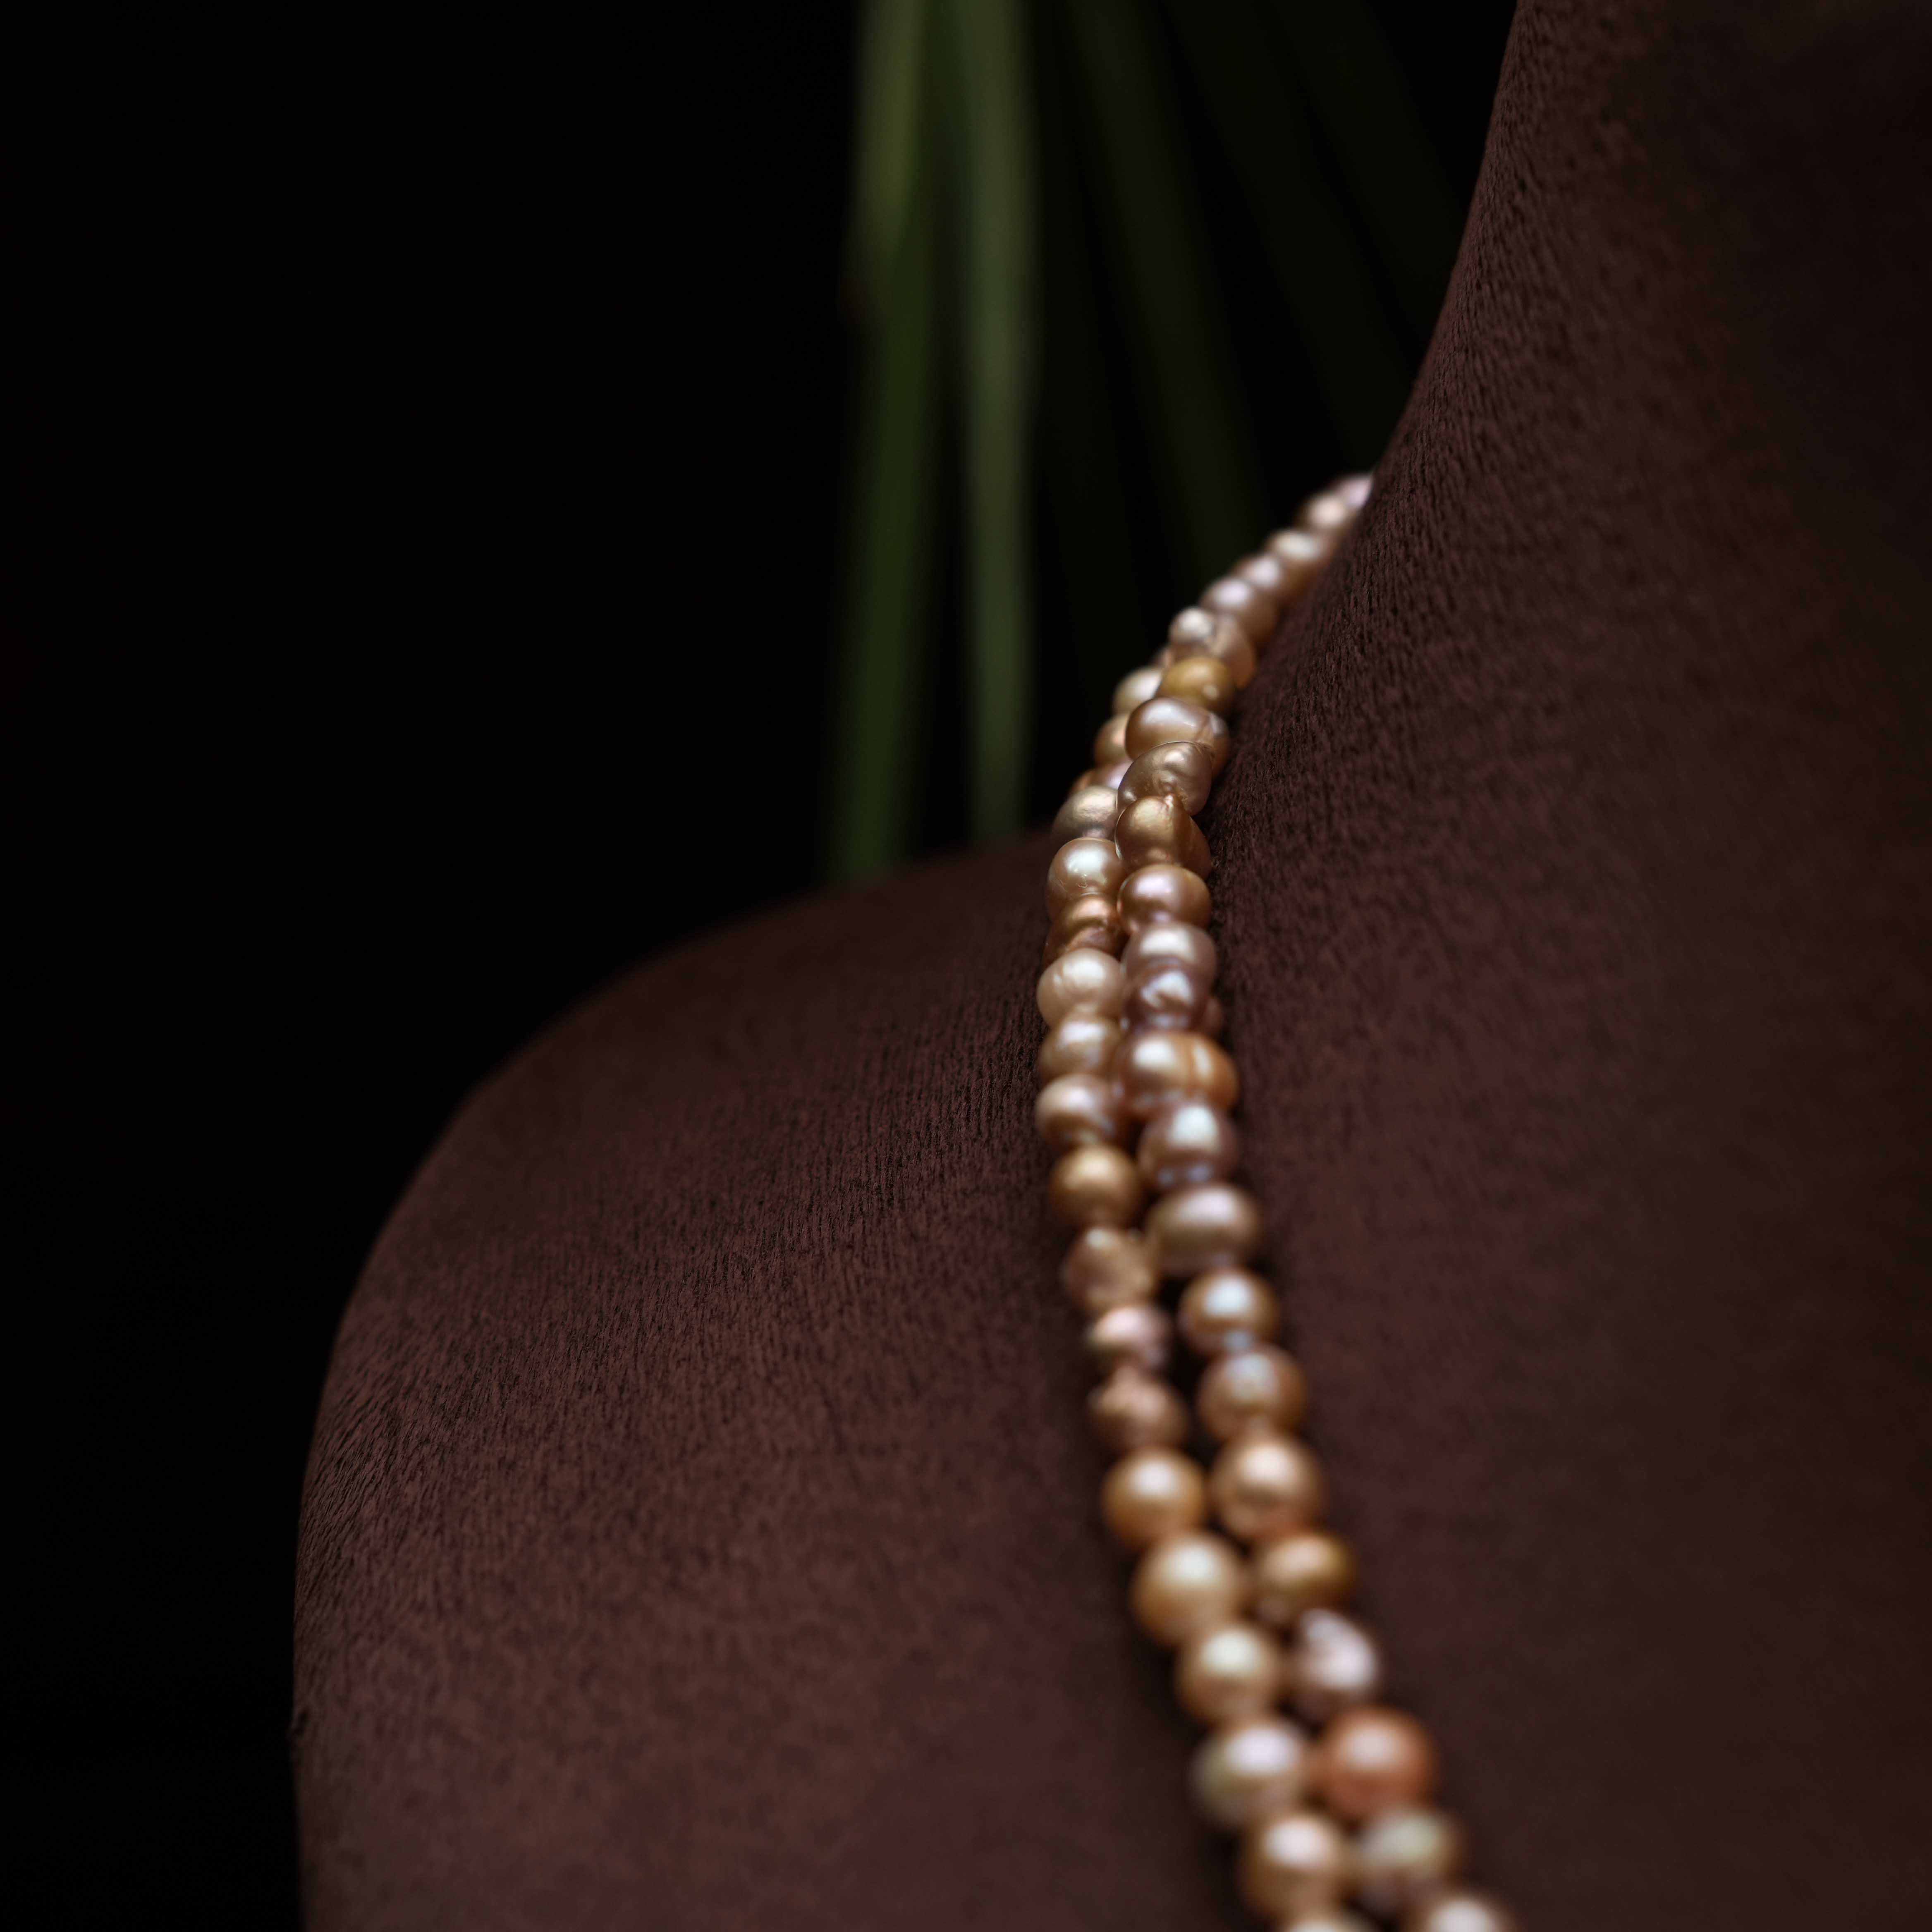 Kanchi Pearl Necklace